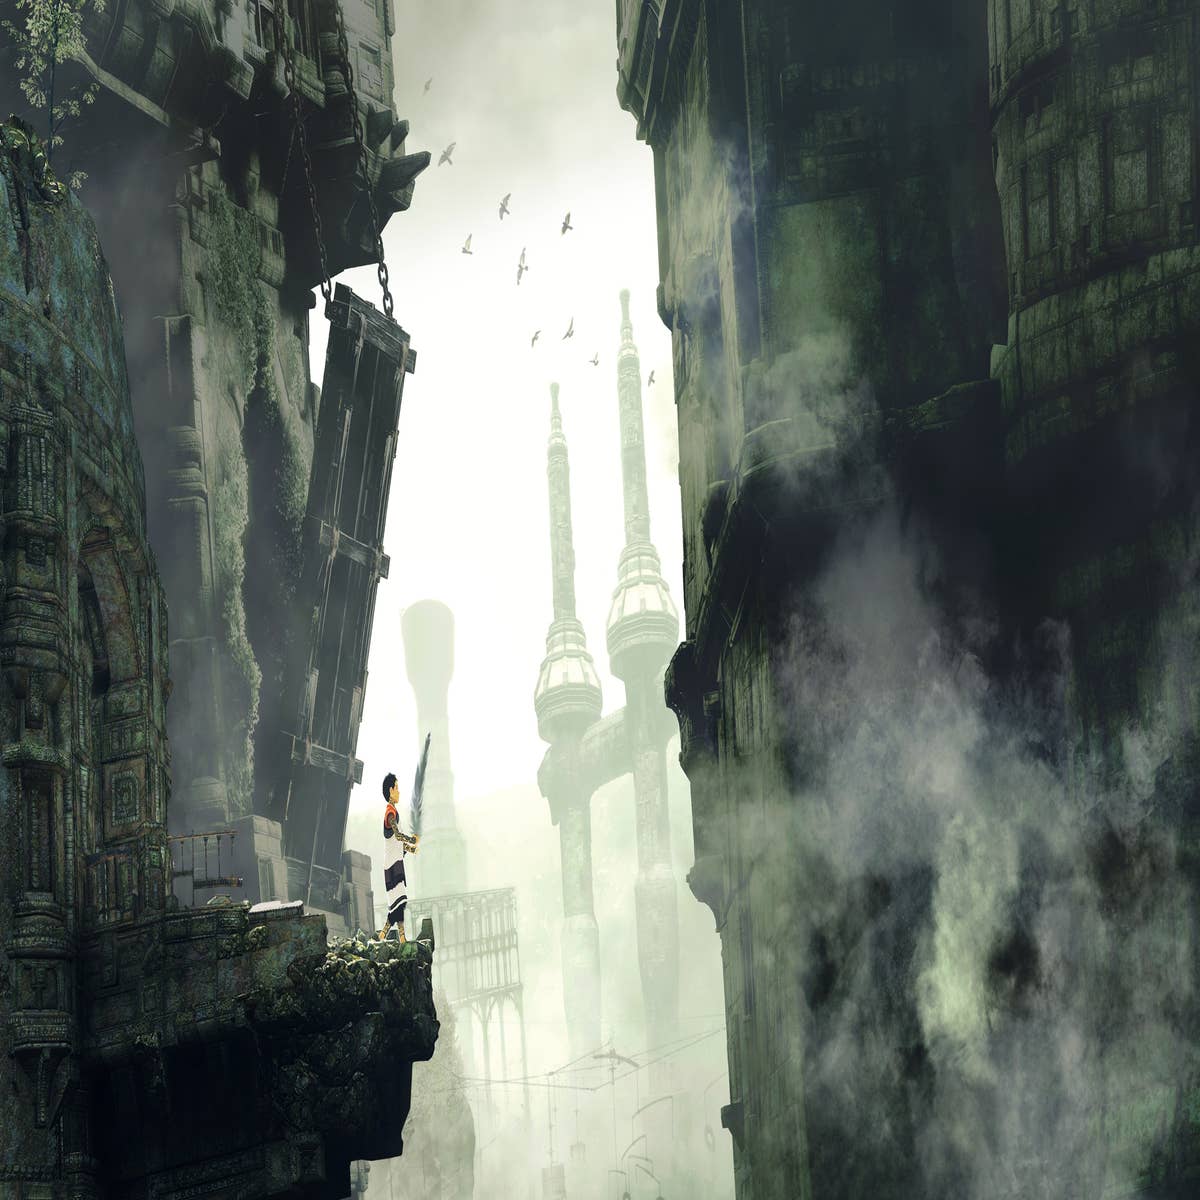 Shadow of the Colossus and Last Guardian creator's next project is